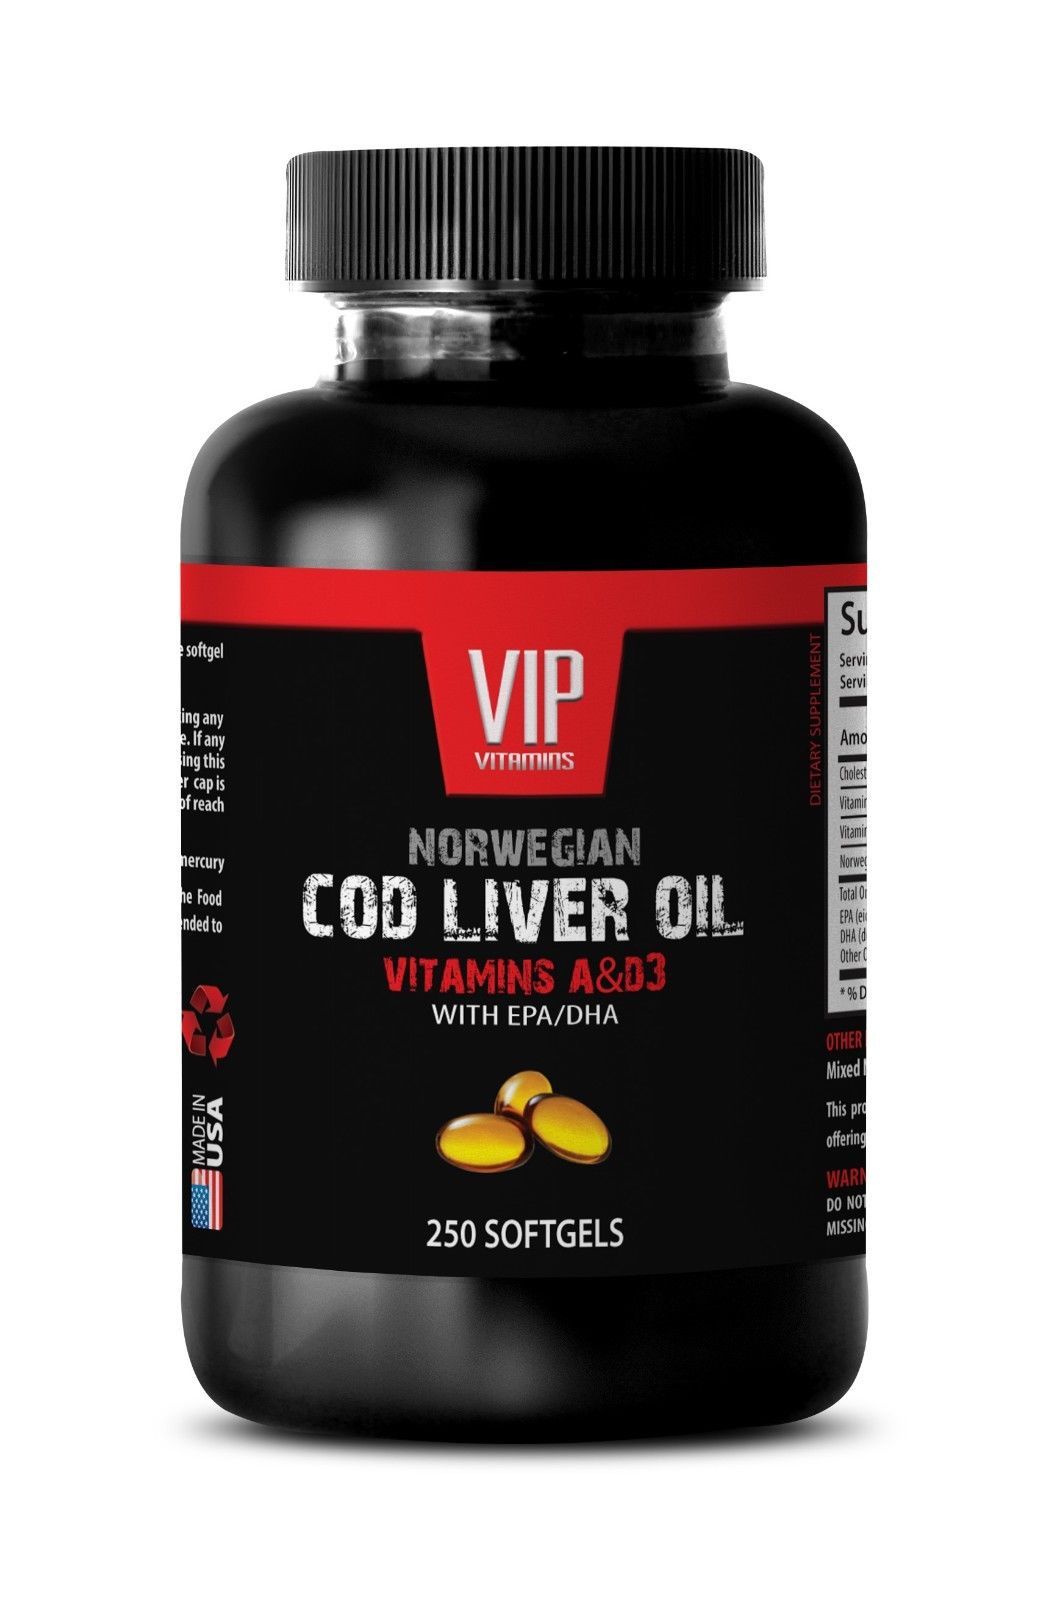 Cod liver oil dha - NORWEGIAN COD LIVER OIL - Brain booster supplements -1 Bot - $17.72